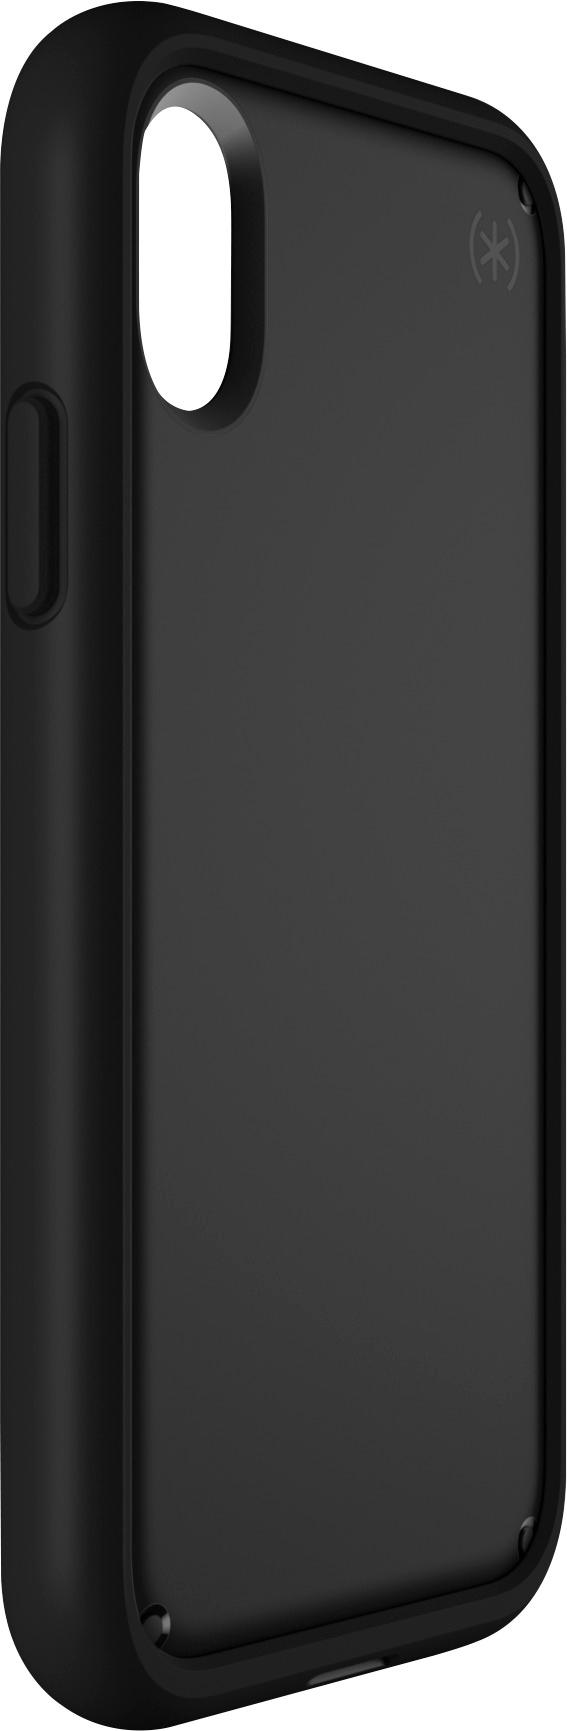 Speck Presidio Ultra iPhone Xs Max Cases Eclipse/Carbon Black/Cathedral